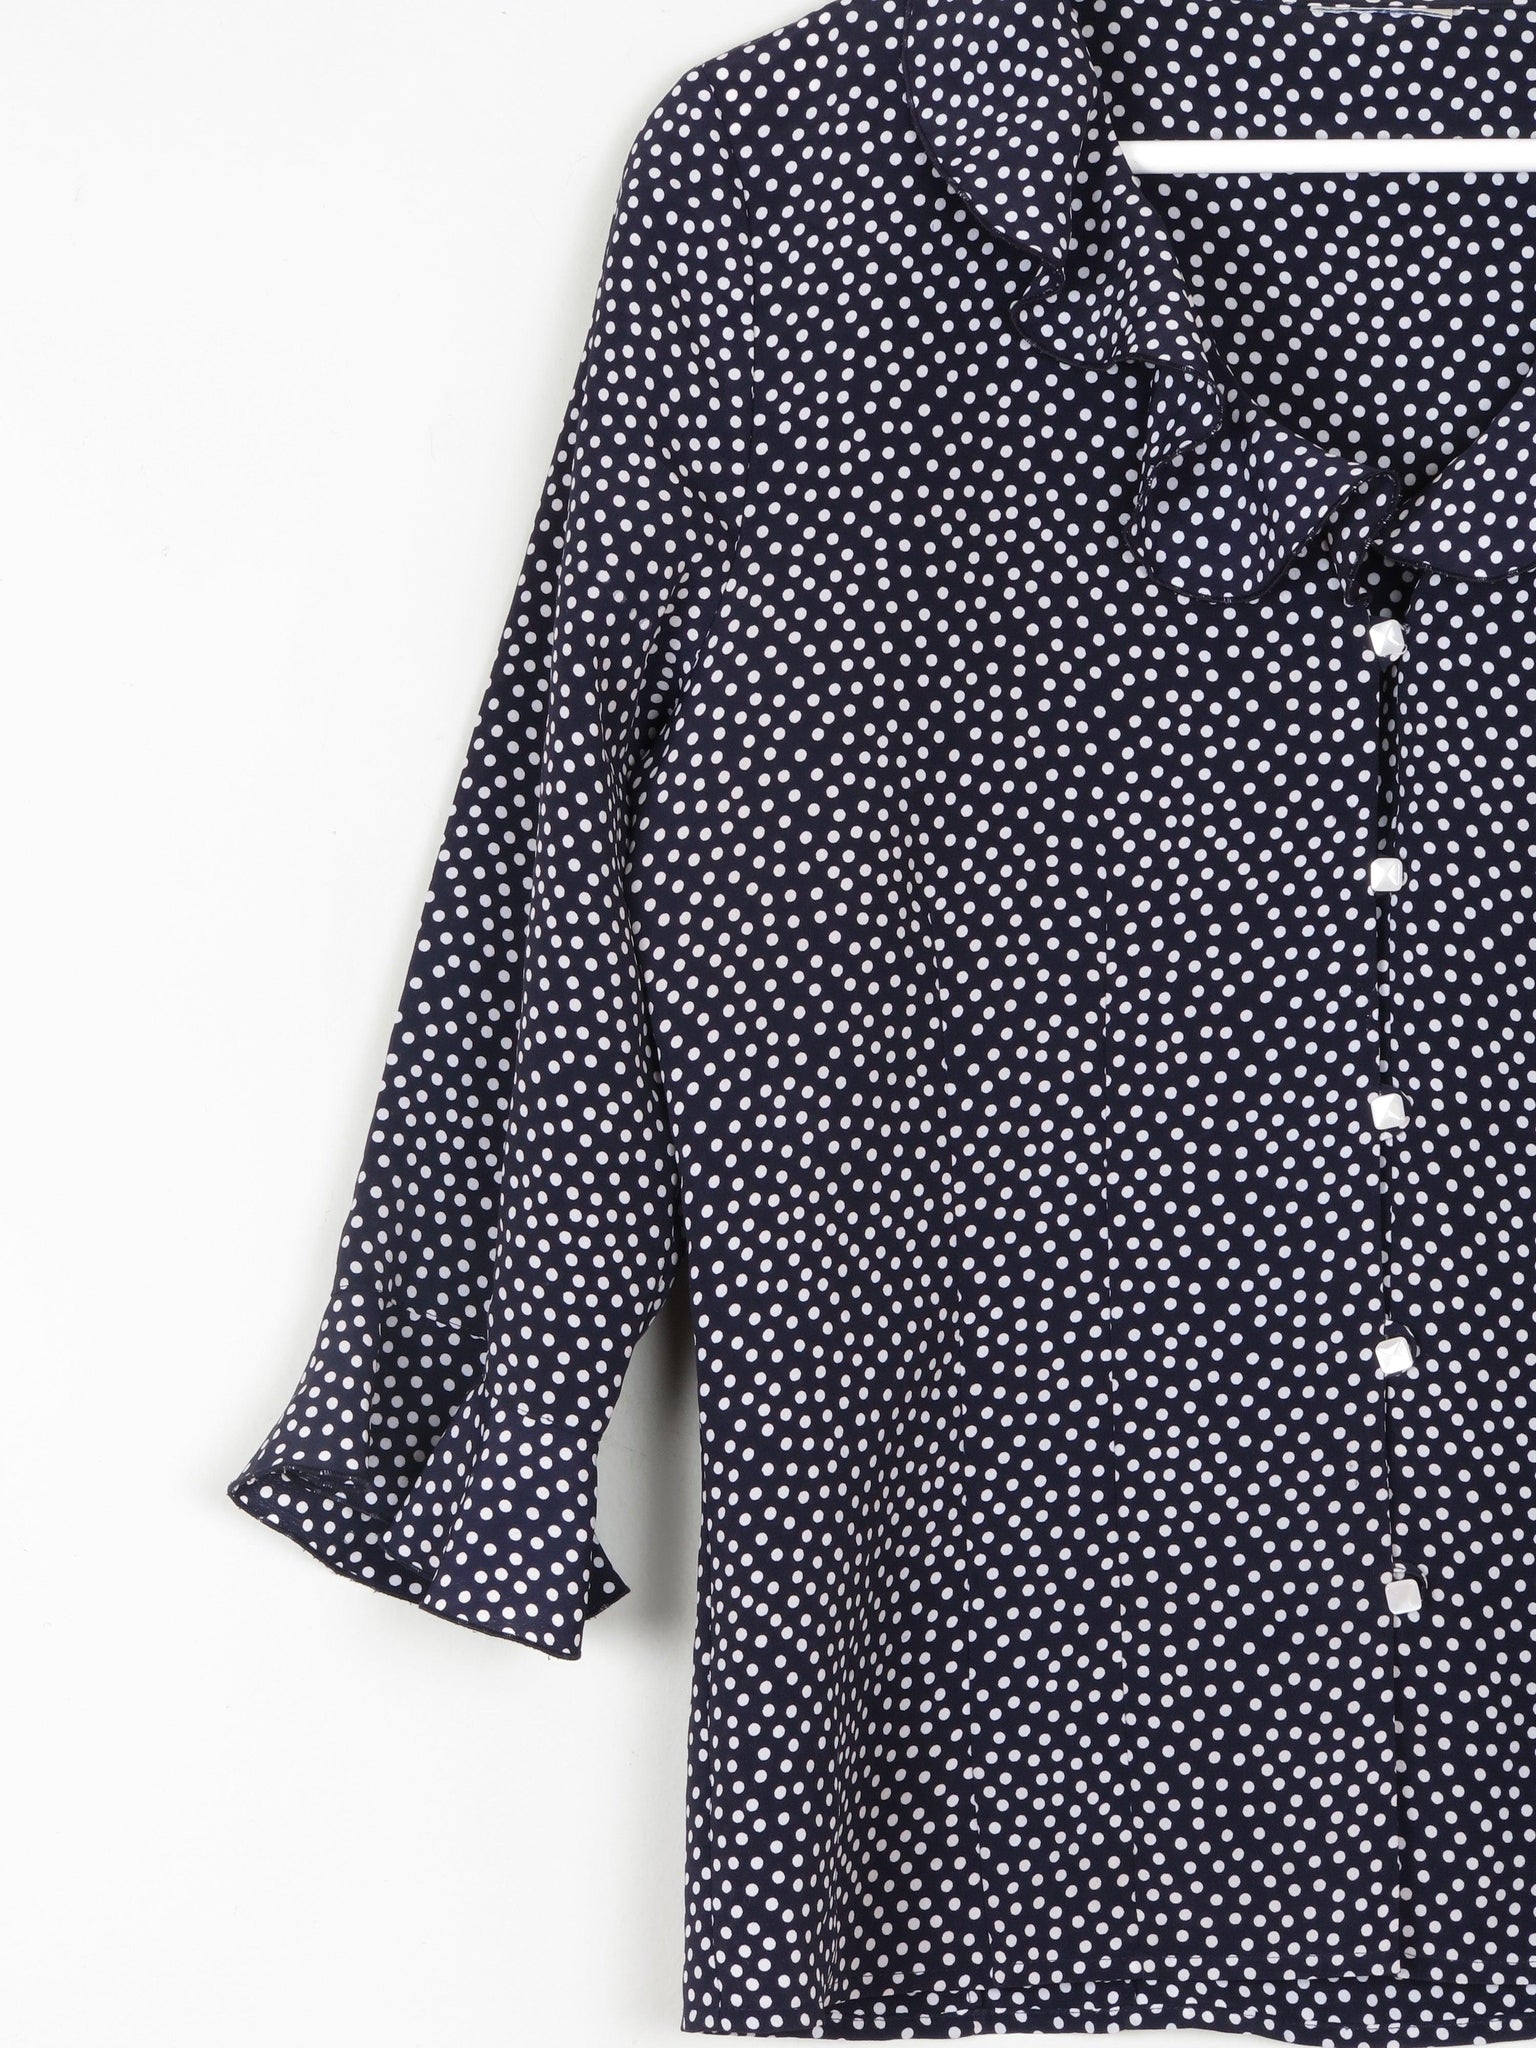 Vintage Navy Polka Dot Blouse With Frills  S - The Harlequin